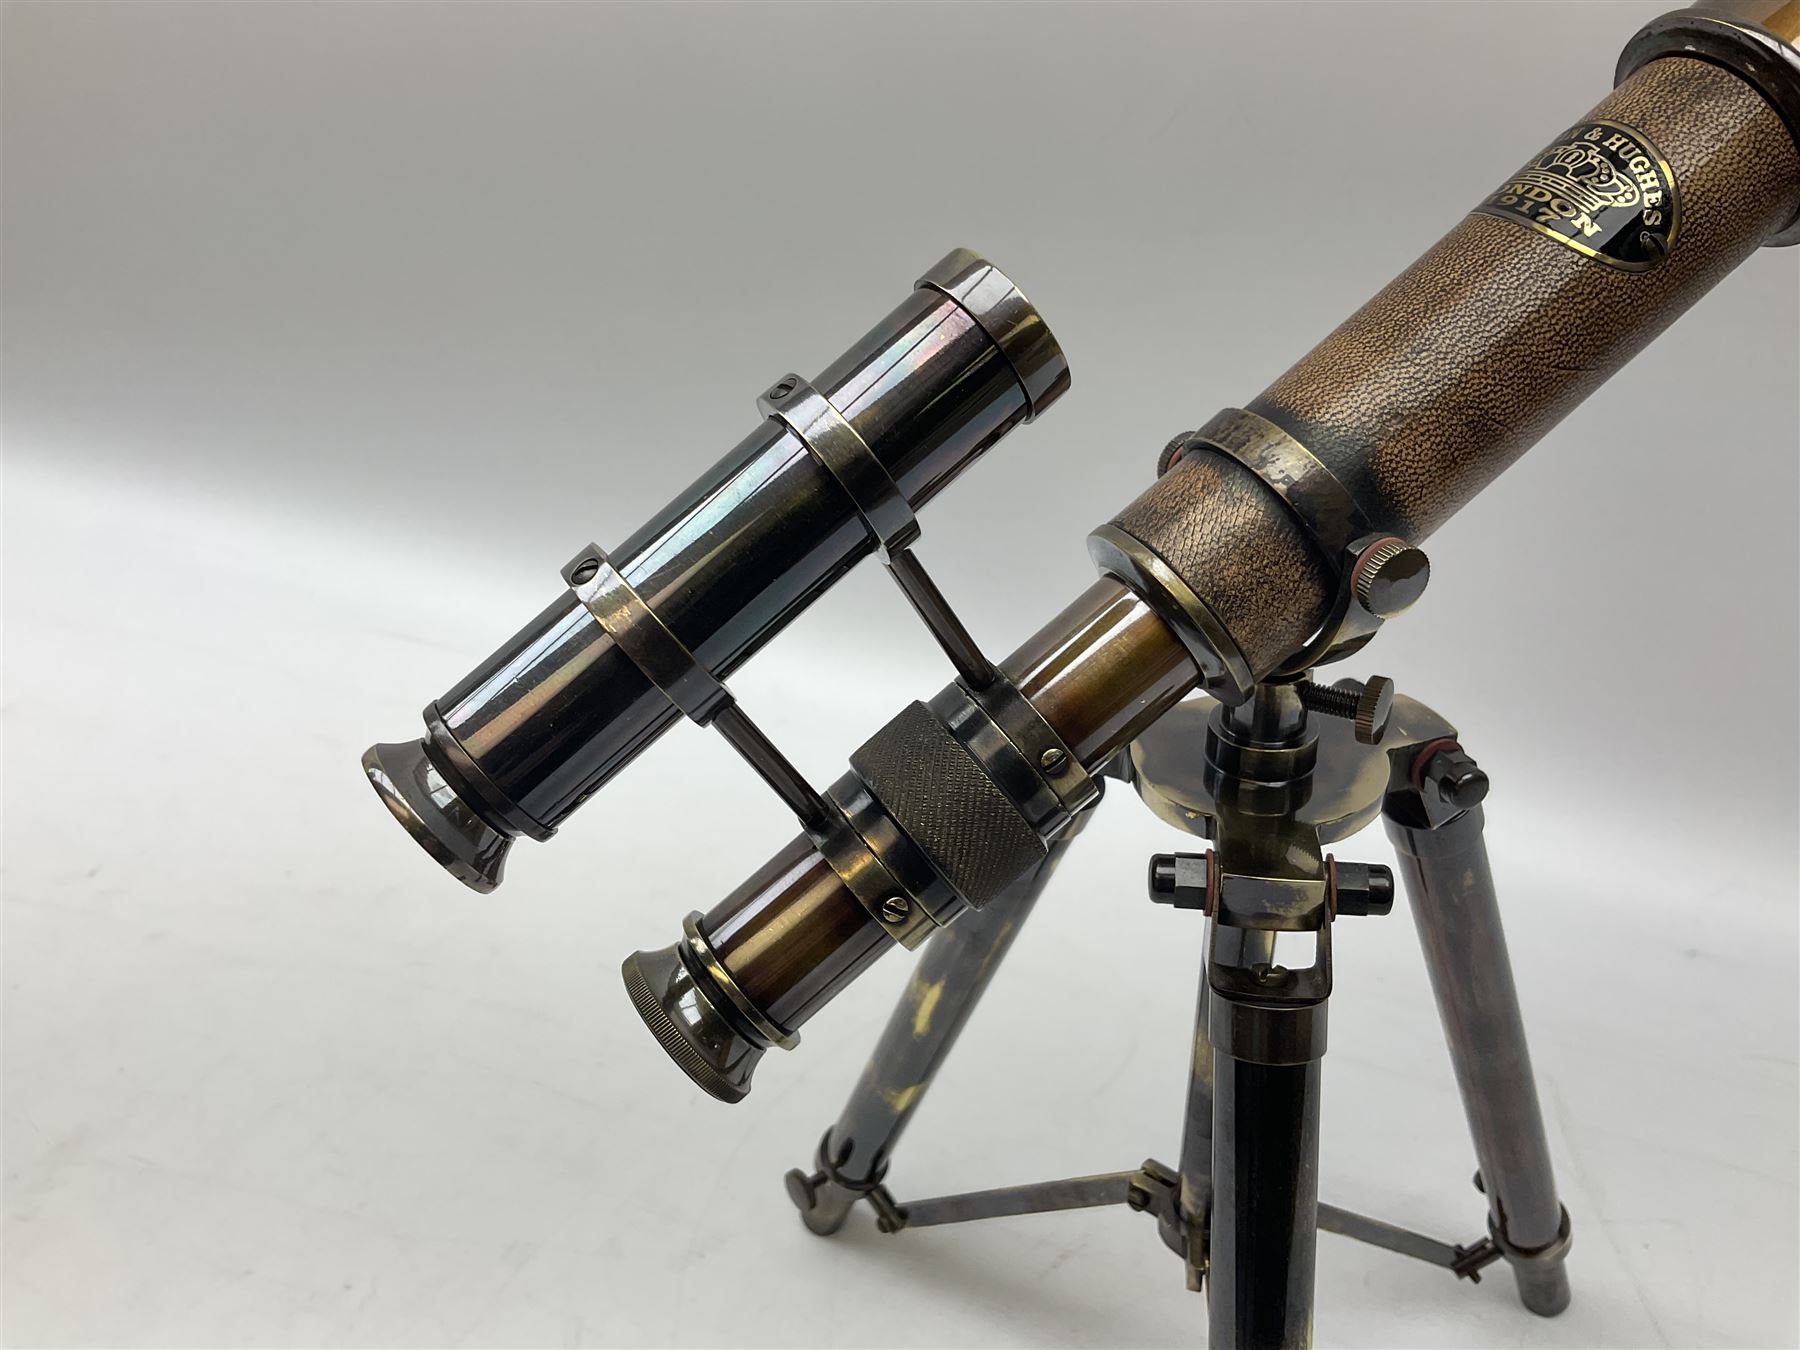 Reproduction brasses telescope on tripod stand with plaque detailed 'Kelvin & Hughes London 1917' - Image 3 of 8